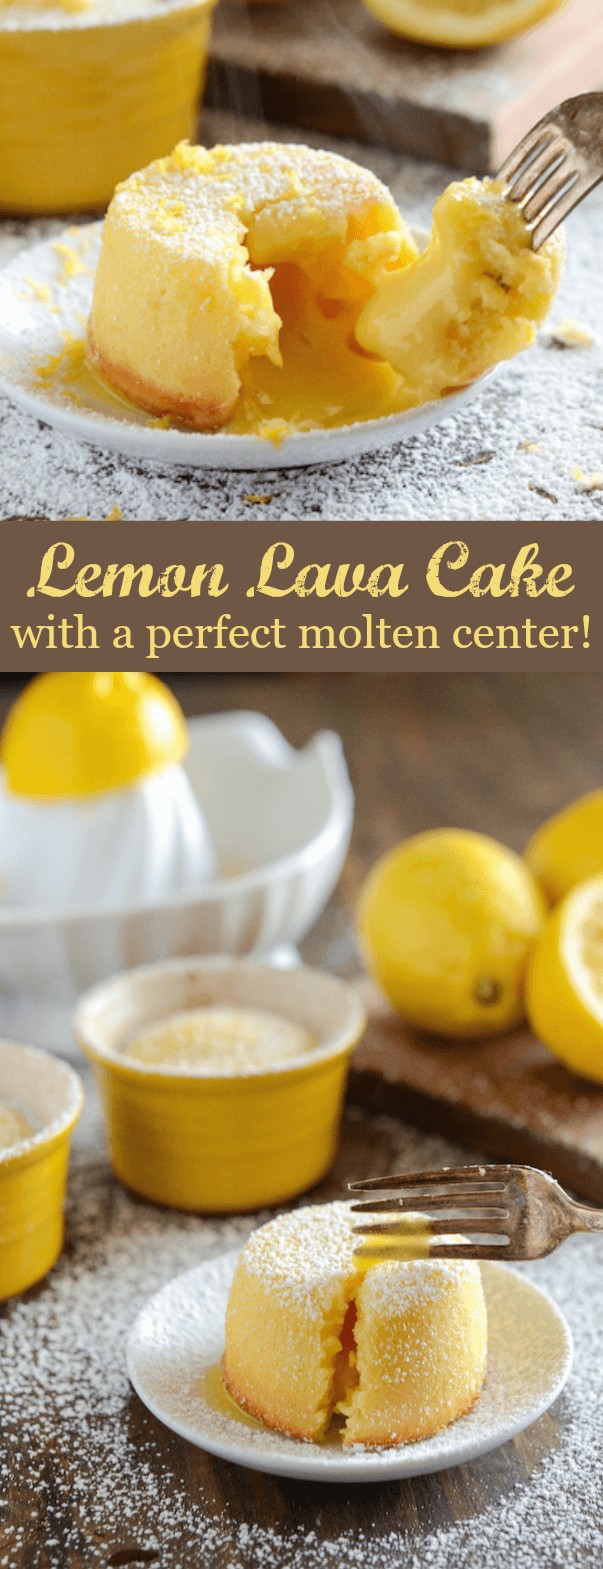 A Collage of Two Images of Lemon Lava Cake with the Molten Center Shown Off